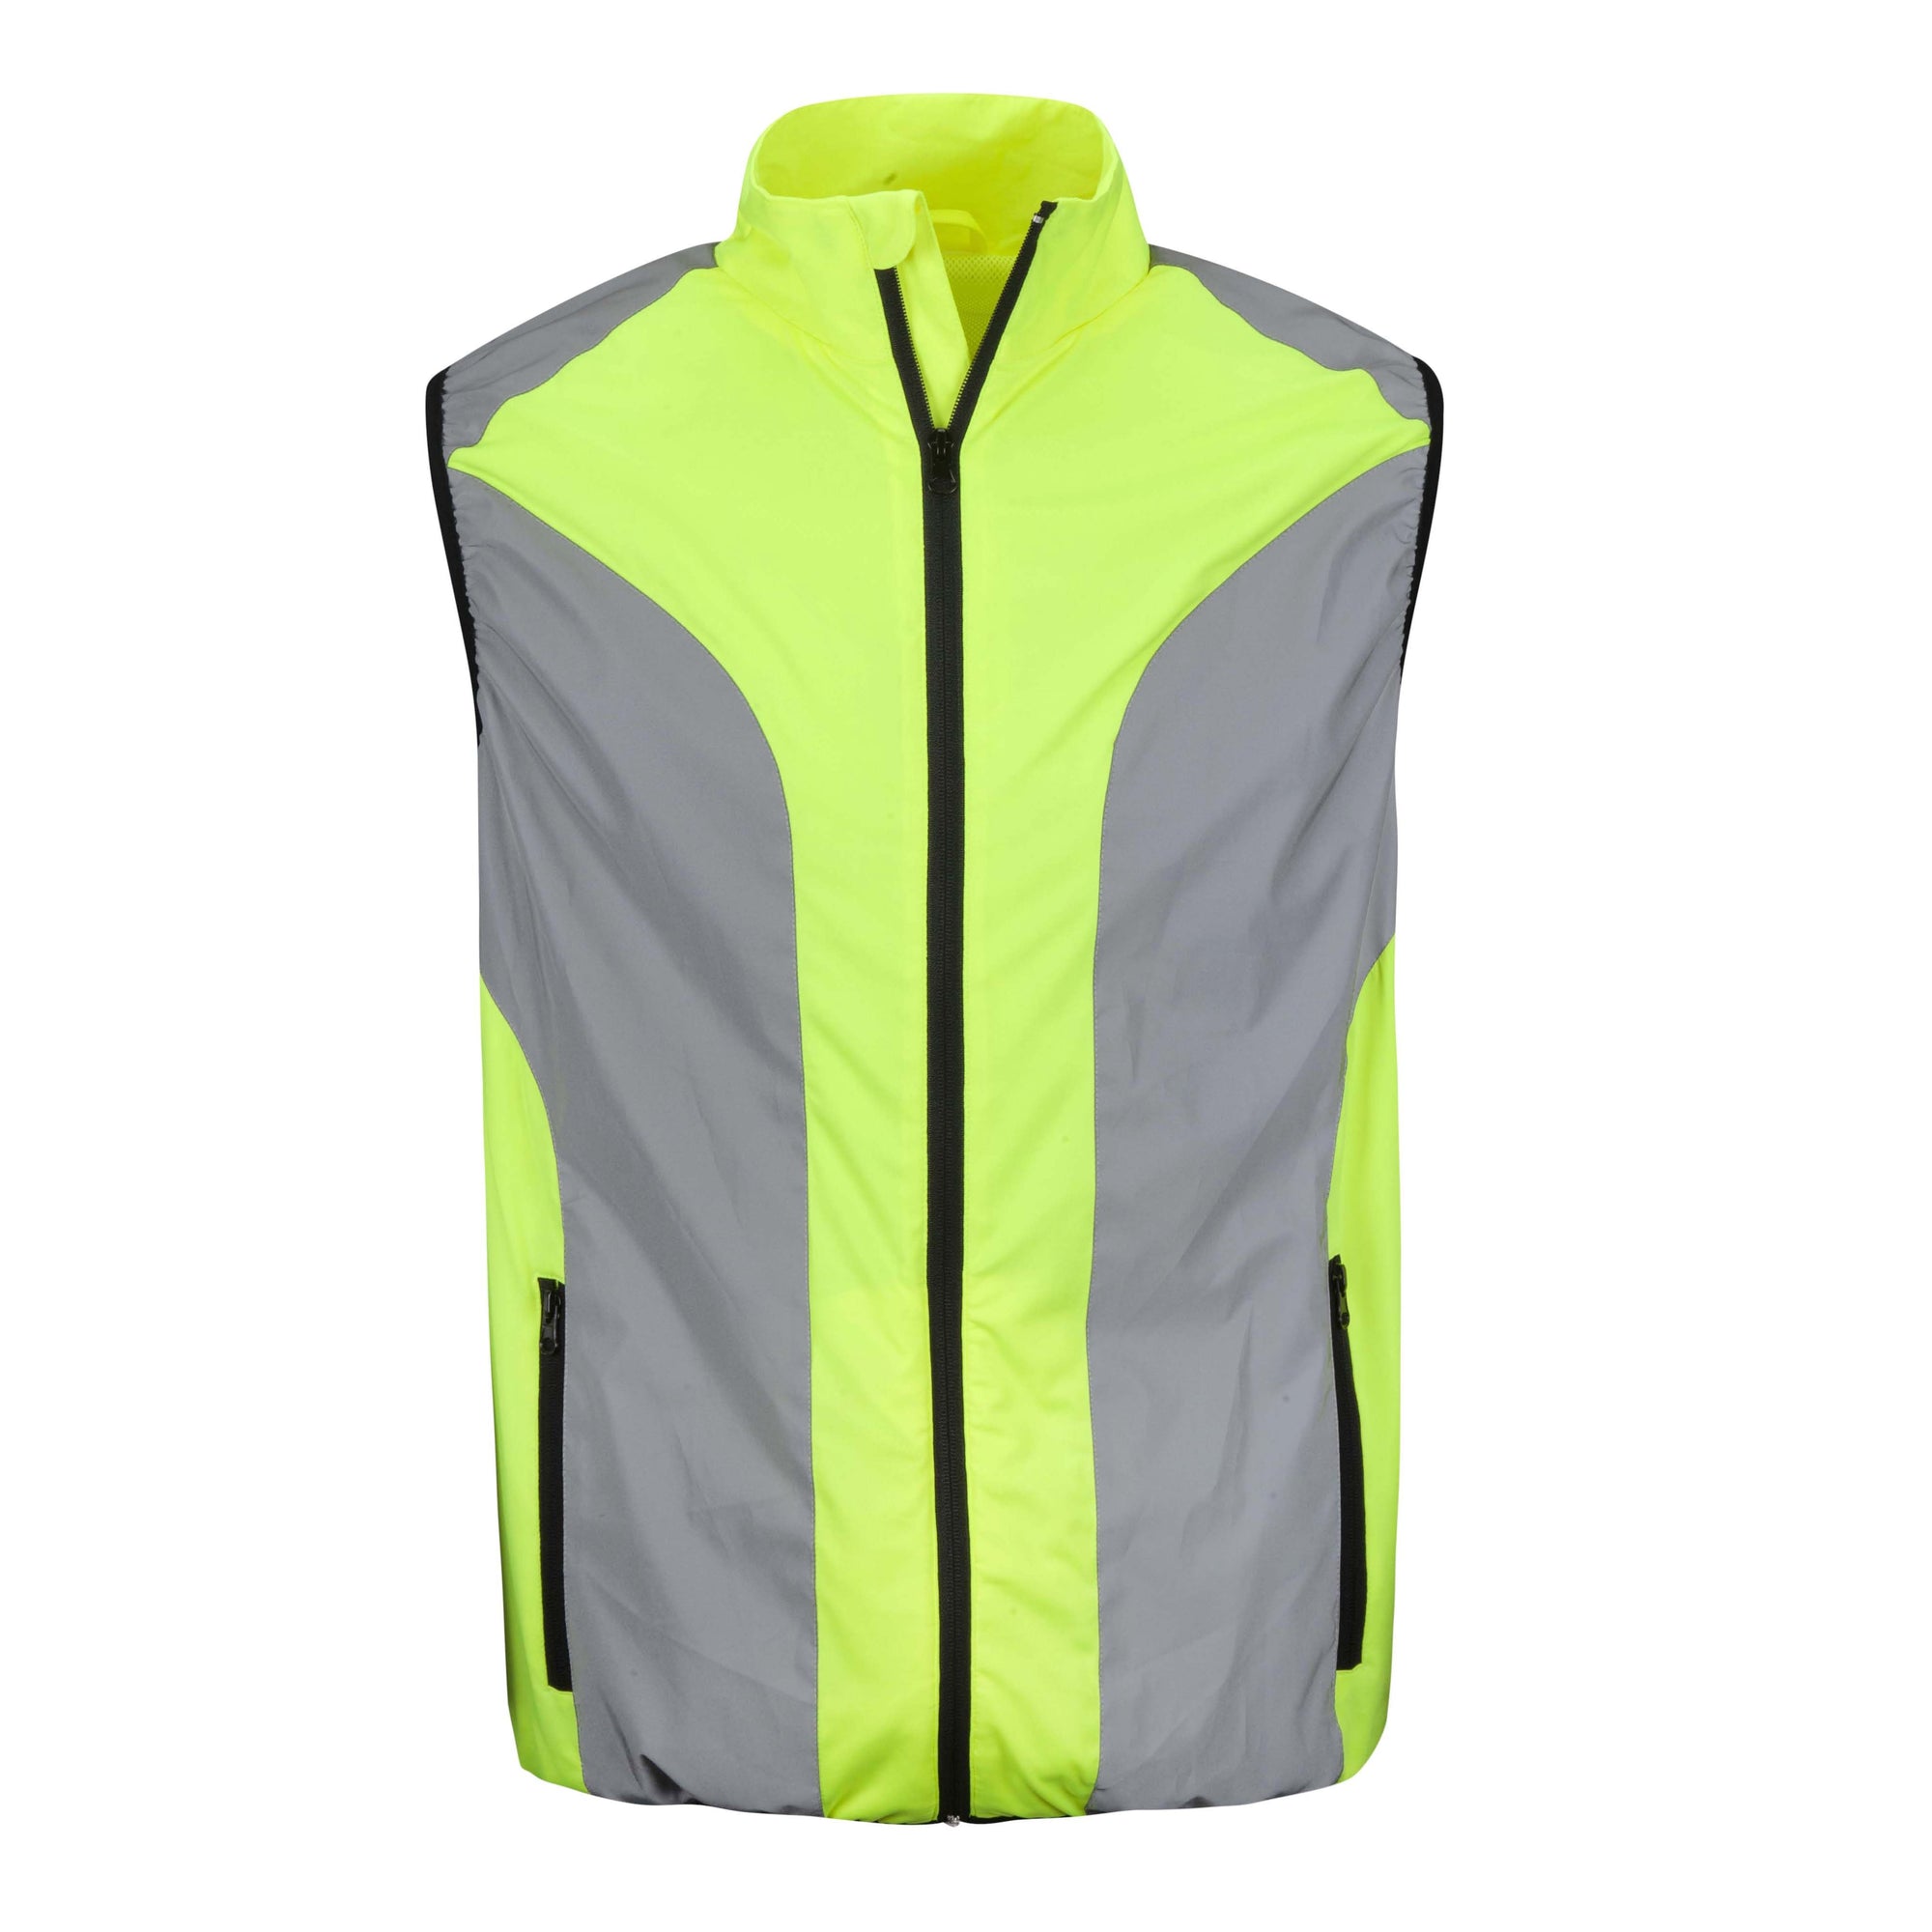 BTR Reflective High Visibility Running & Cycling Vest, Gilet. - BTR Sports